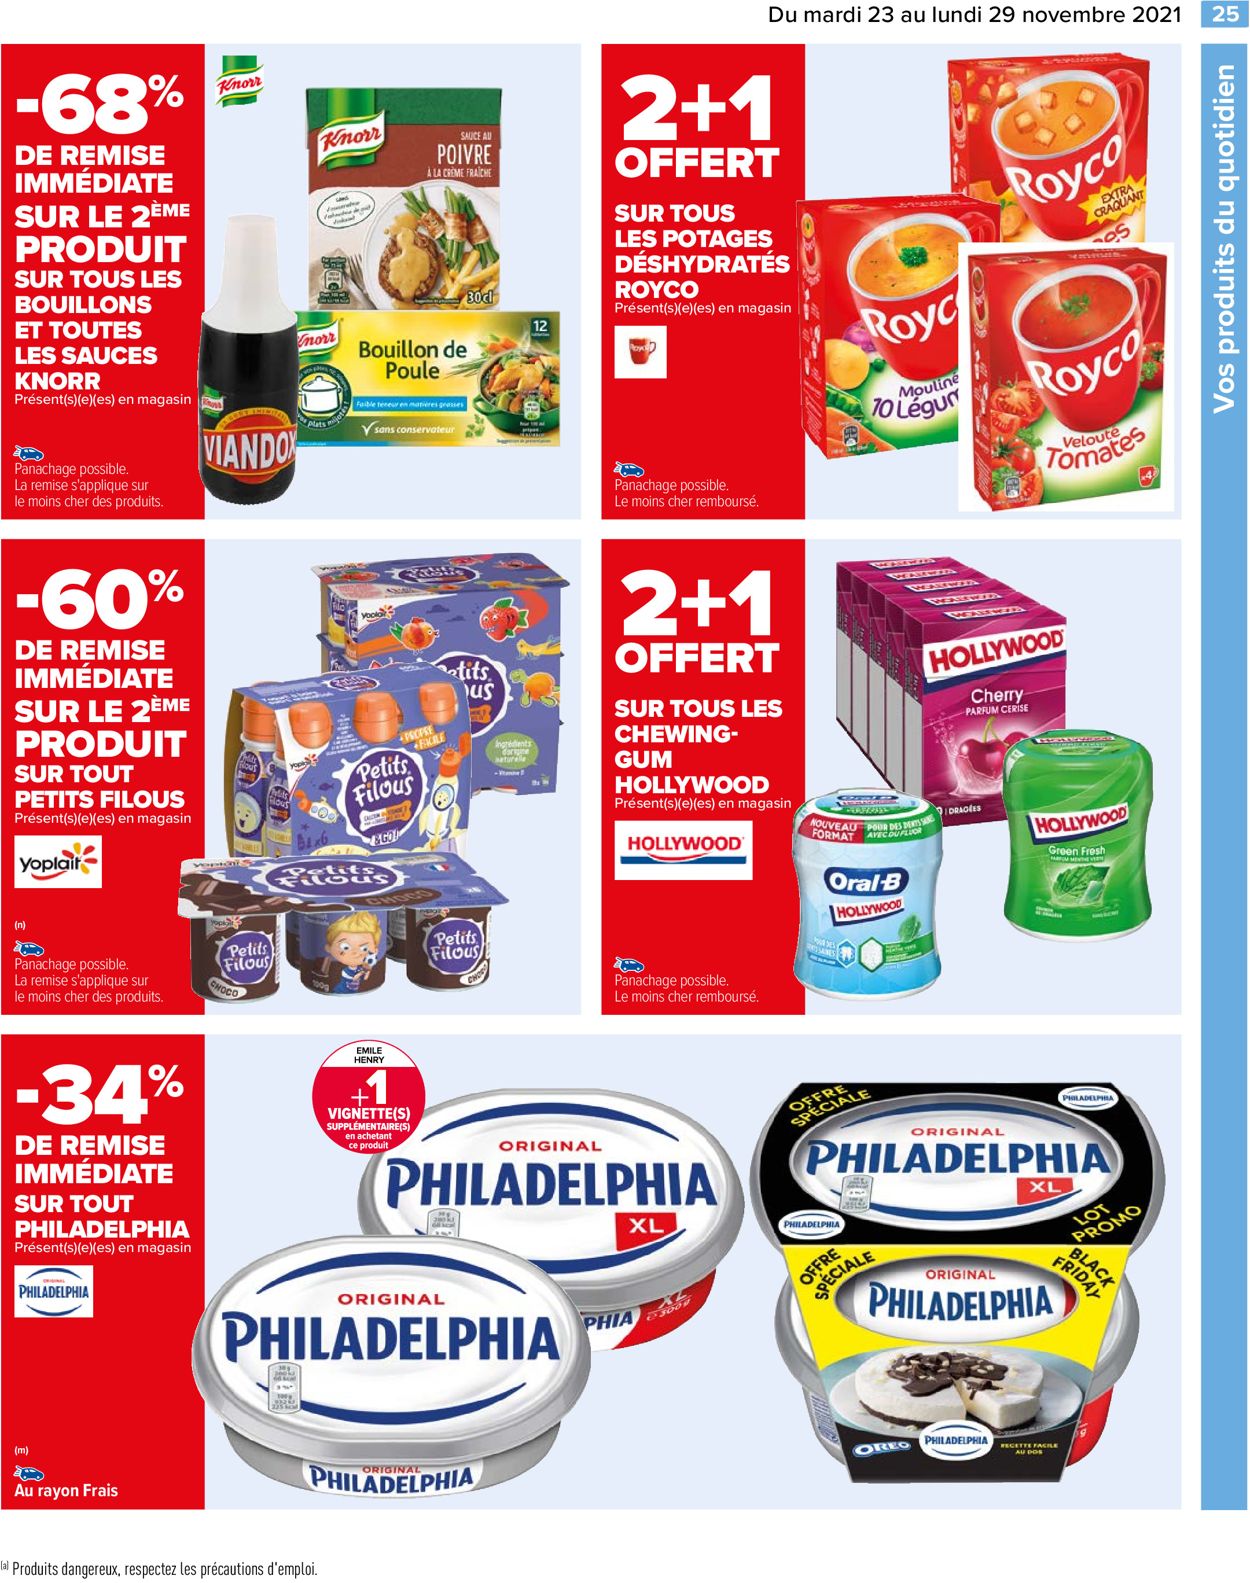 Carrefour BLACK WEEK 2021 Catalogue - 23.11-29.11.2021 (Page 25)